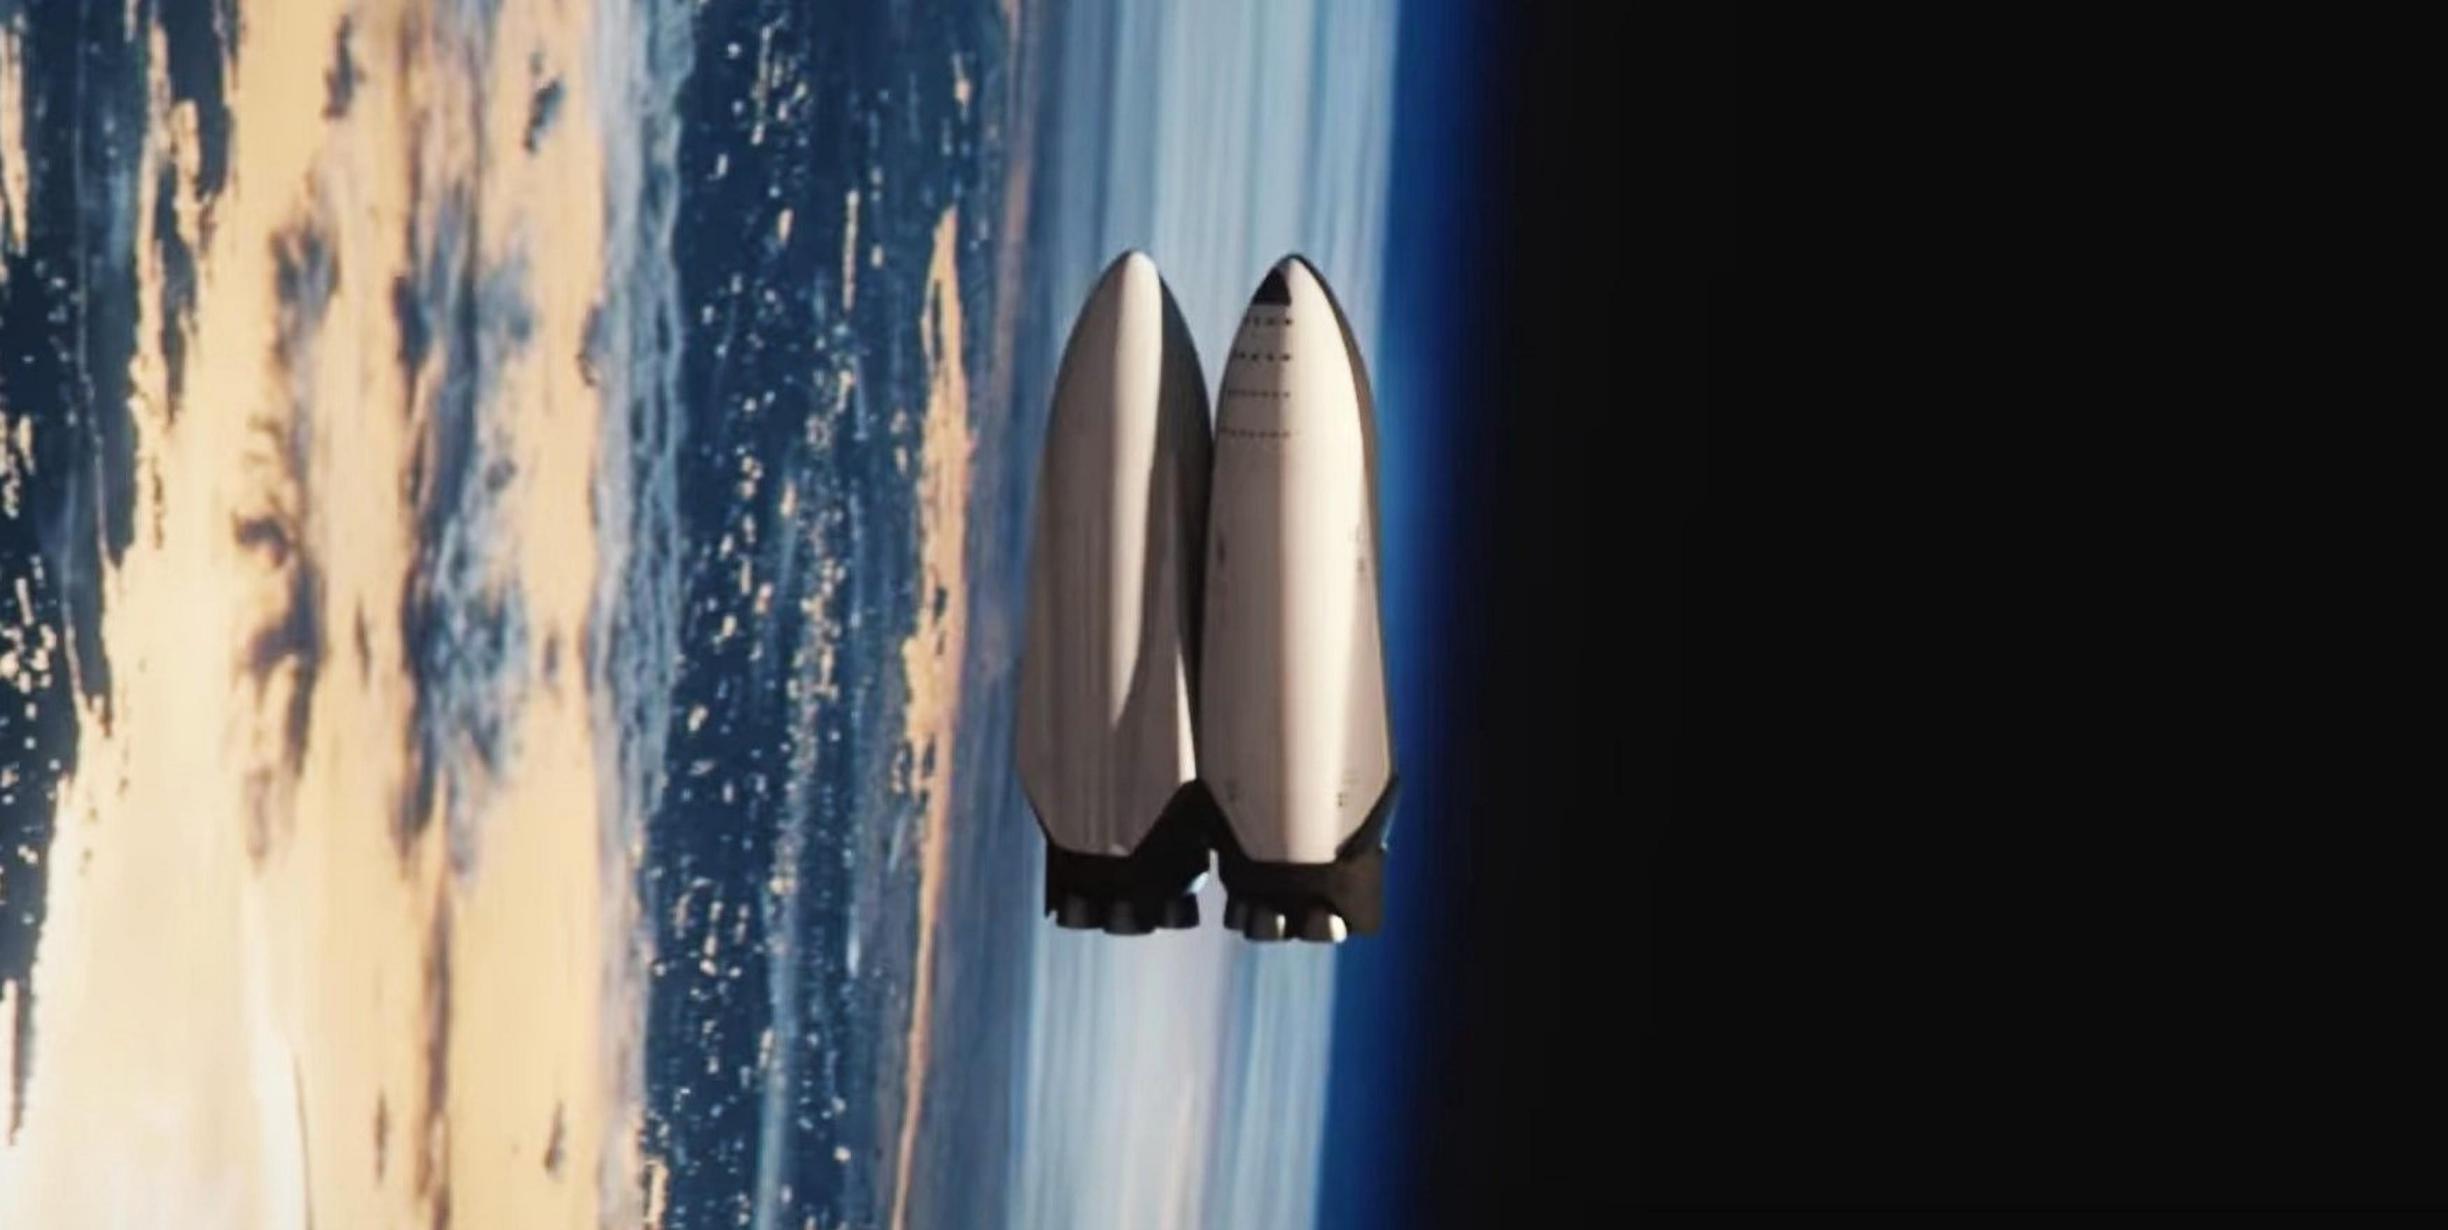 Starship ITS refueling concept 2016 (SpaceX) 2 crop (c)